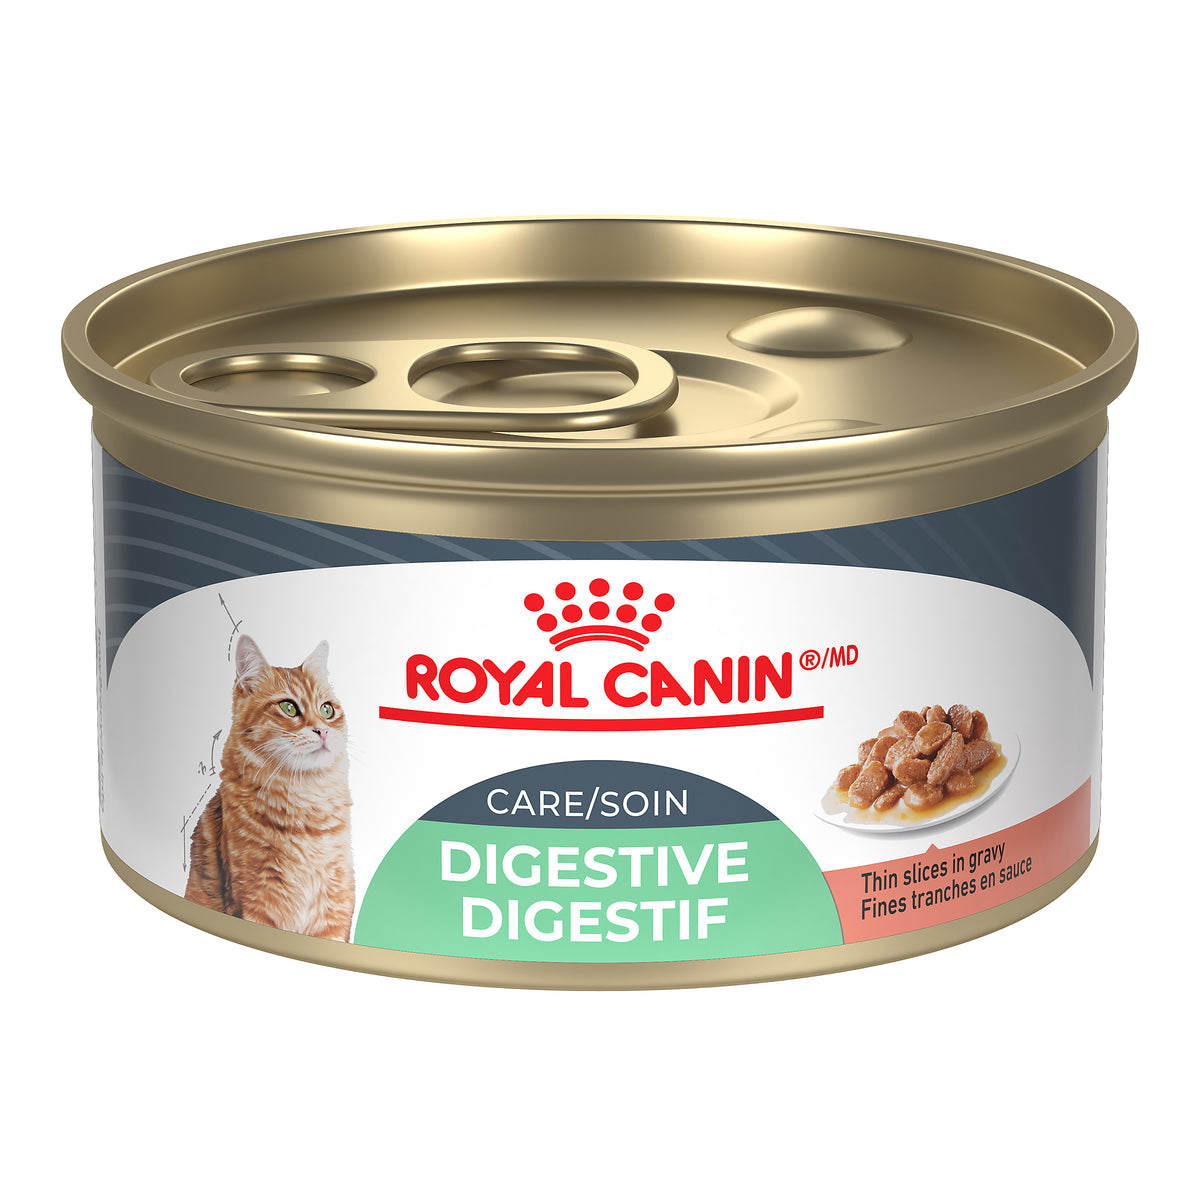 Royal Canin Digest Sensitive (Thin Slices in Gravy) - Wet Canned cat food